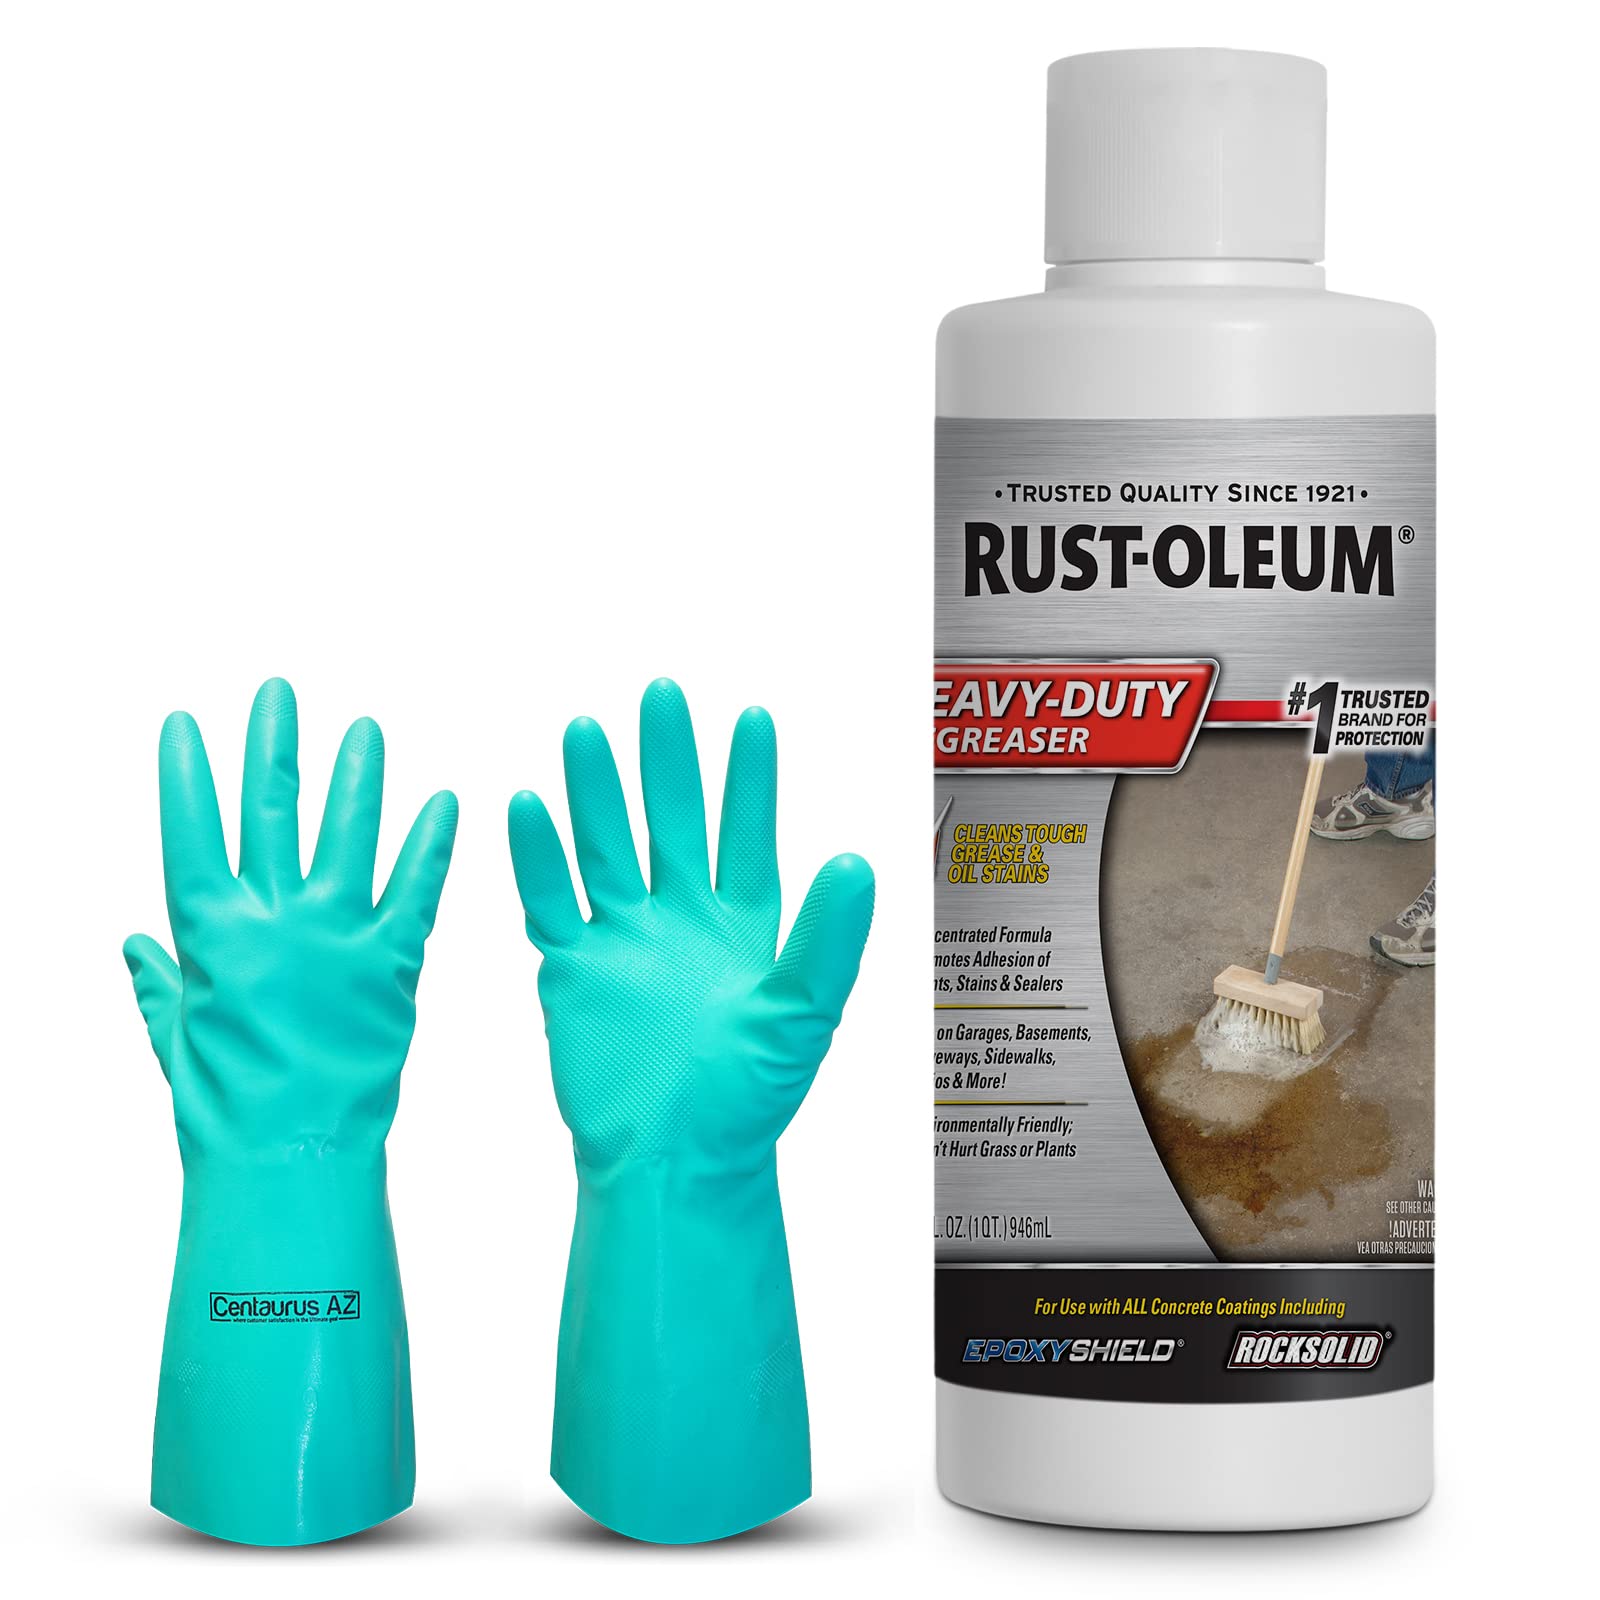 Centaurus AZ Rust Oleum Concentrated Heavy duty Degreaser-Ideal Garage Floor Cleaner-Effective Degreaser Cleaner Heavy duty Automotive-Available with Premium Quality Gloves-32oz